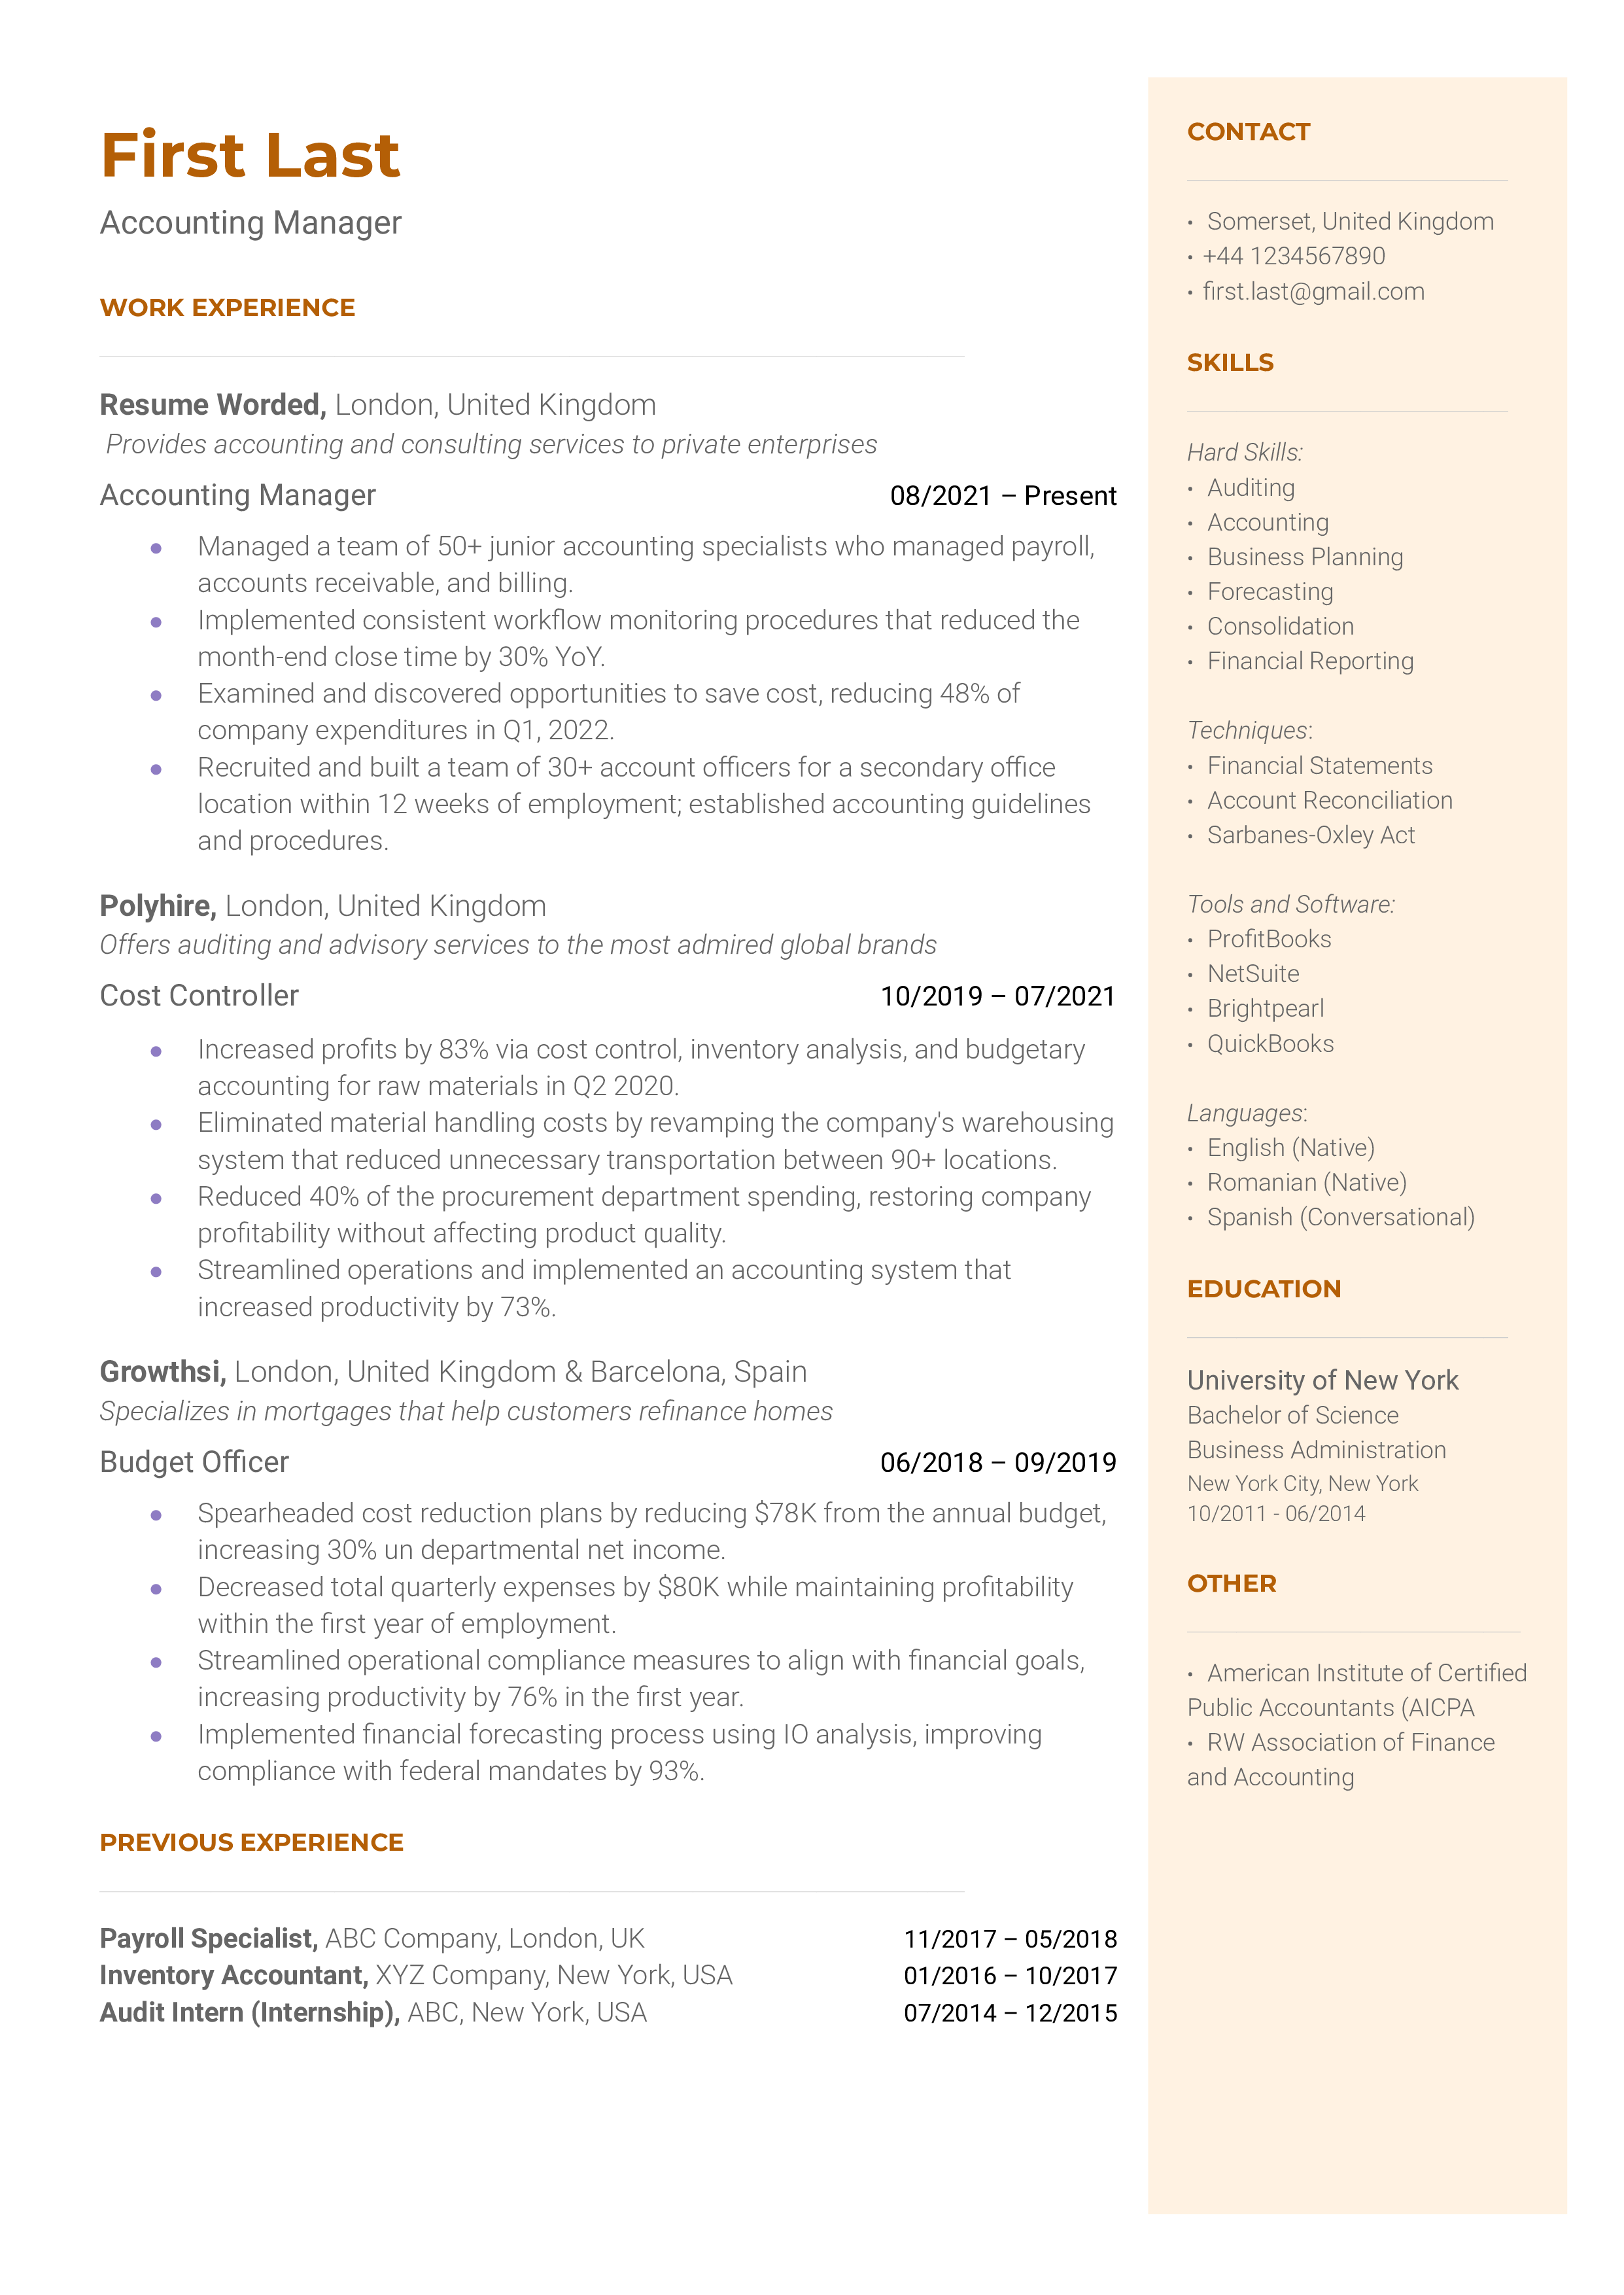 A CV of a potential Accounting Manager highlighting managerial skills and technological proficiency.